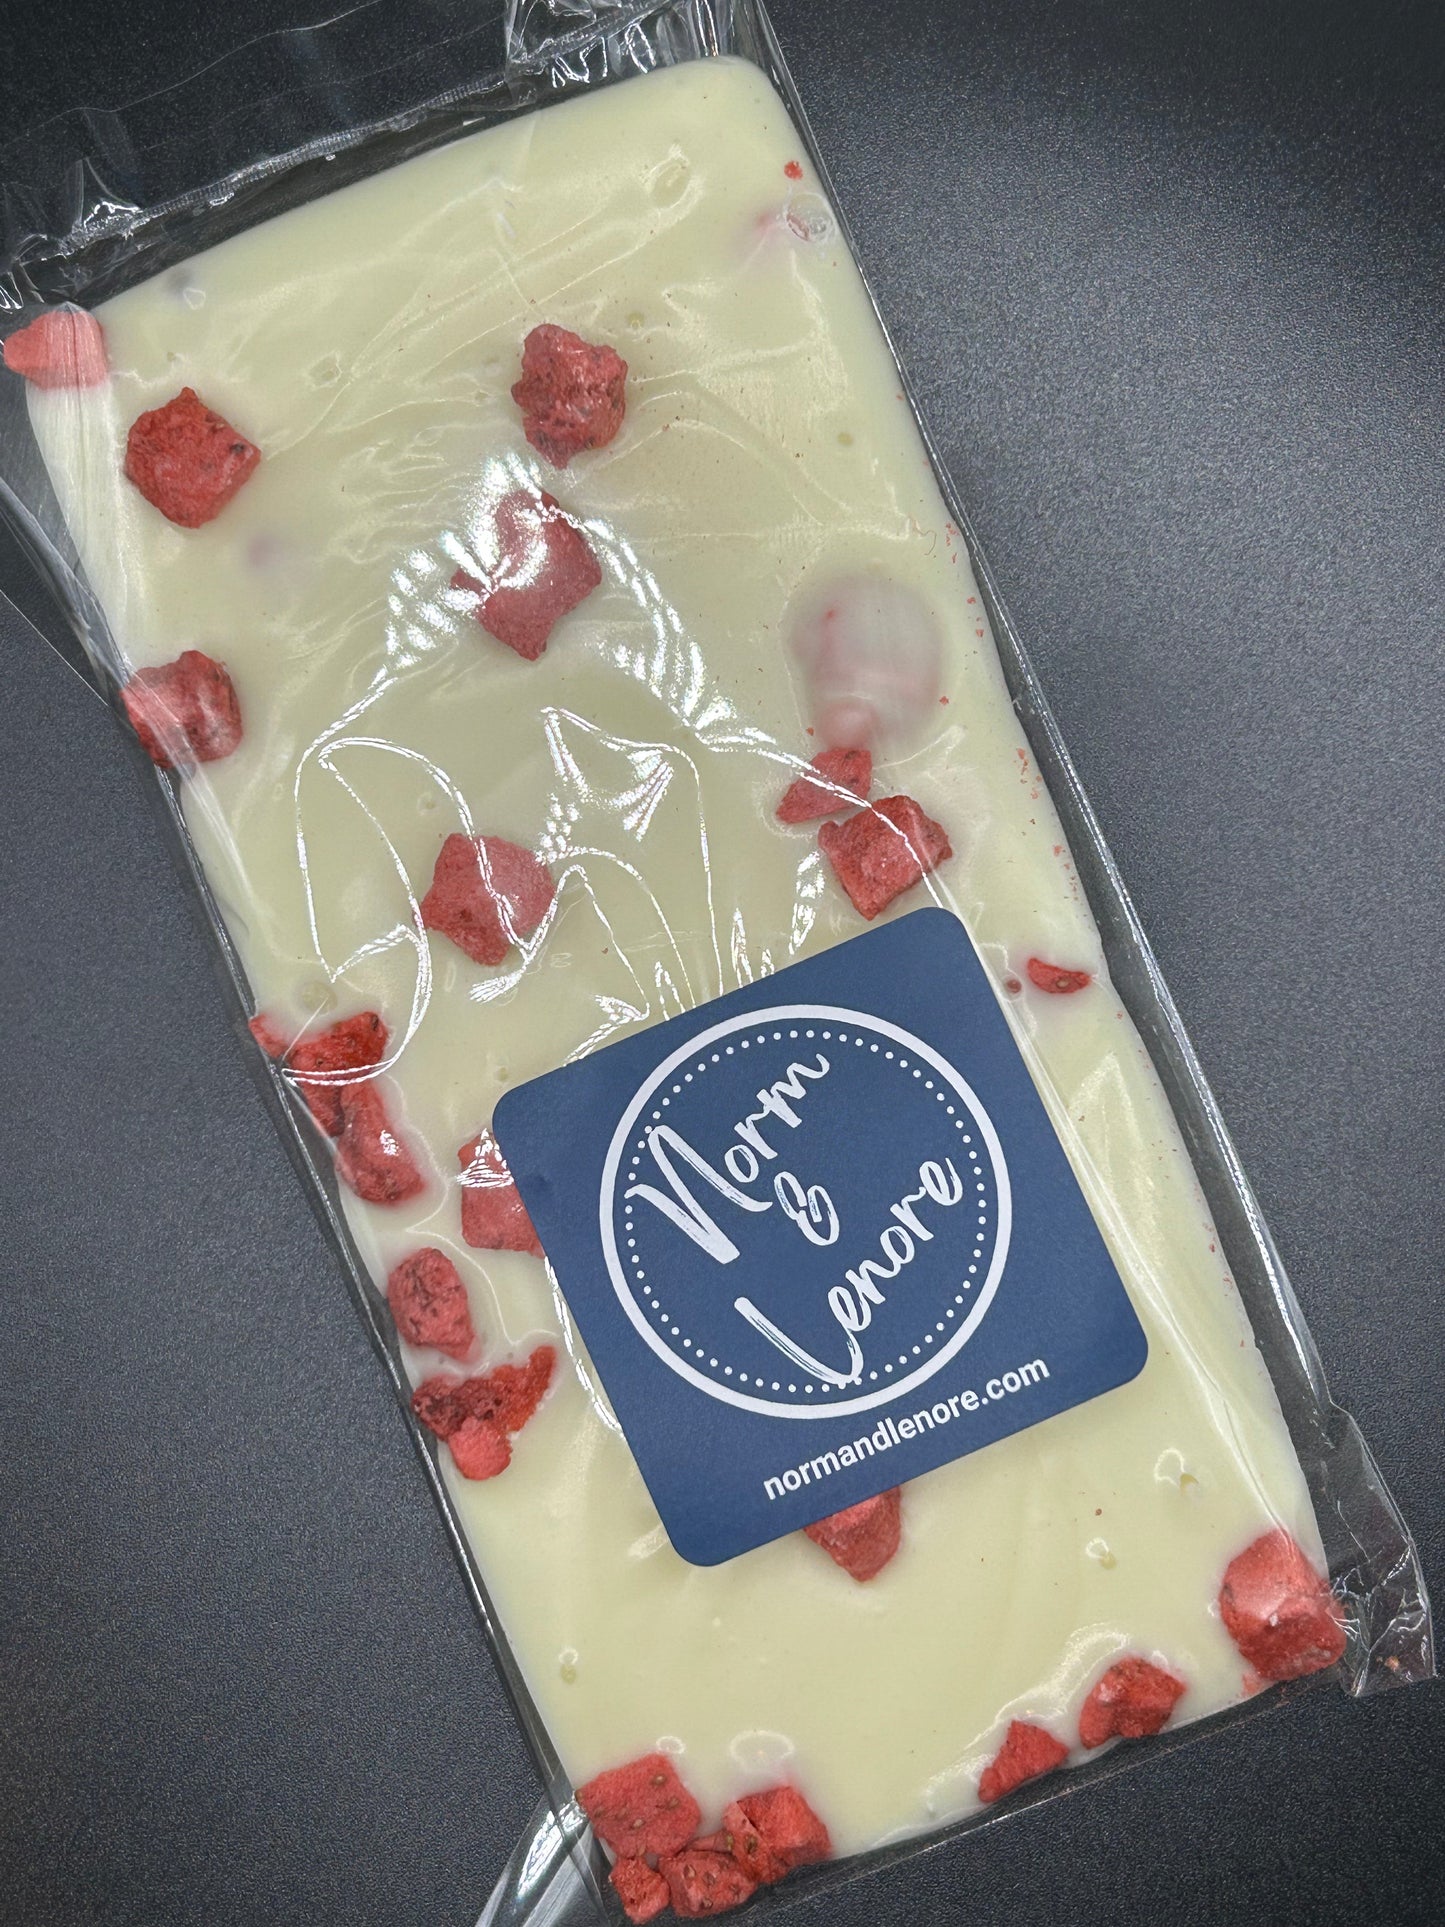 Wholesale White Chocolate Very Berry Specialty Bar